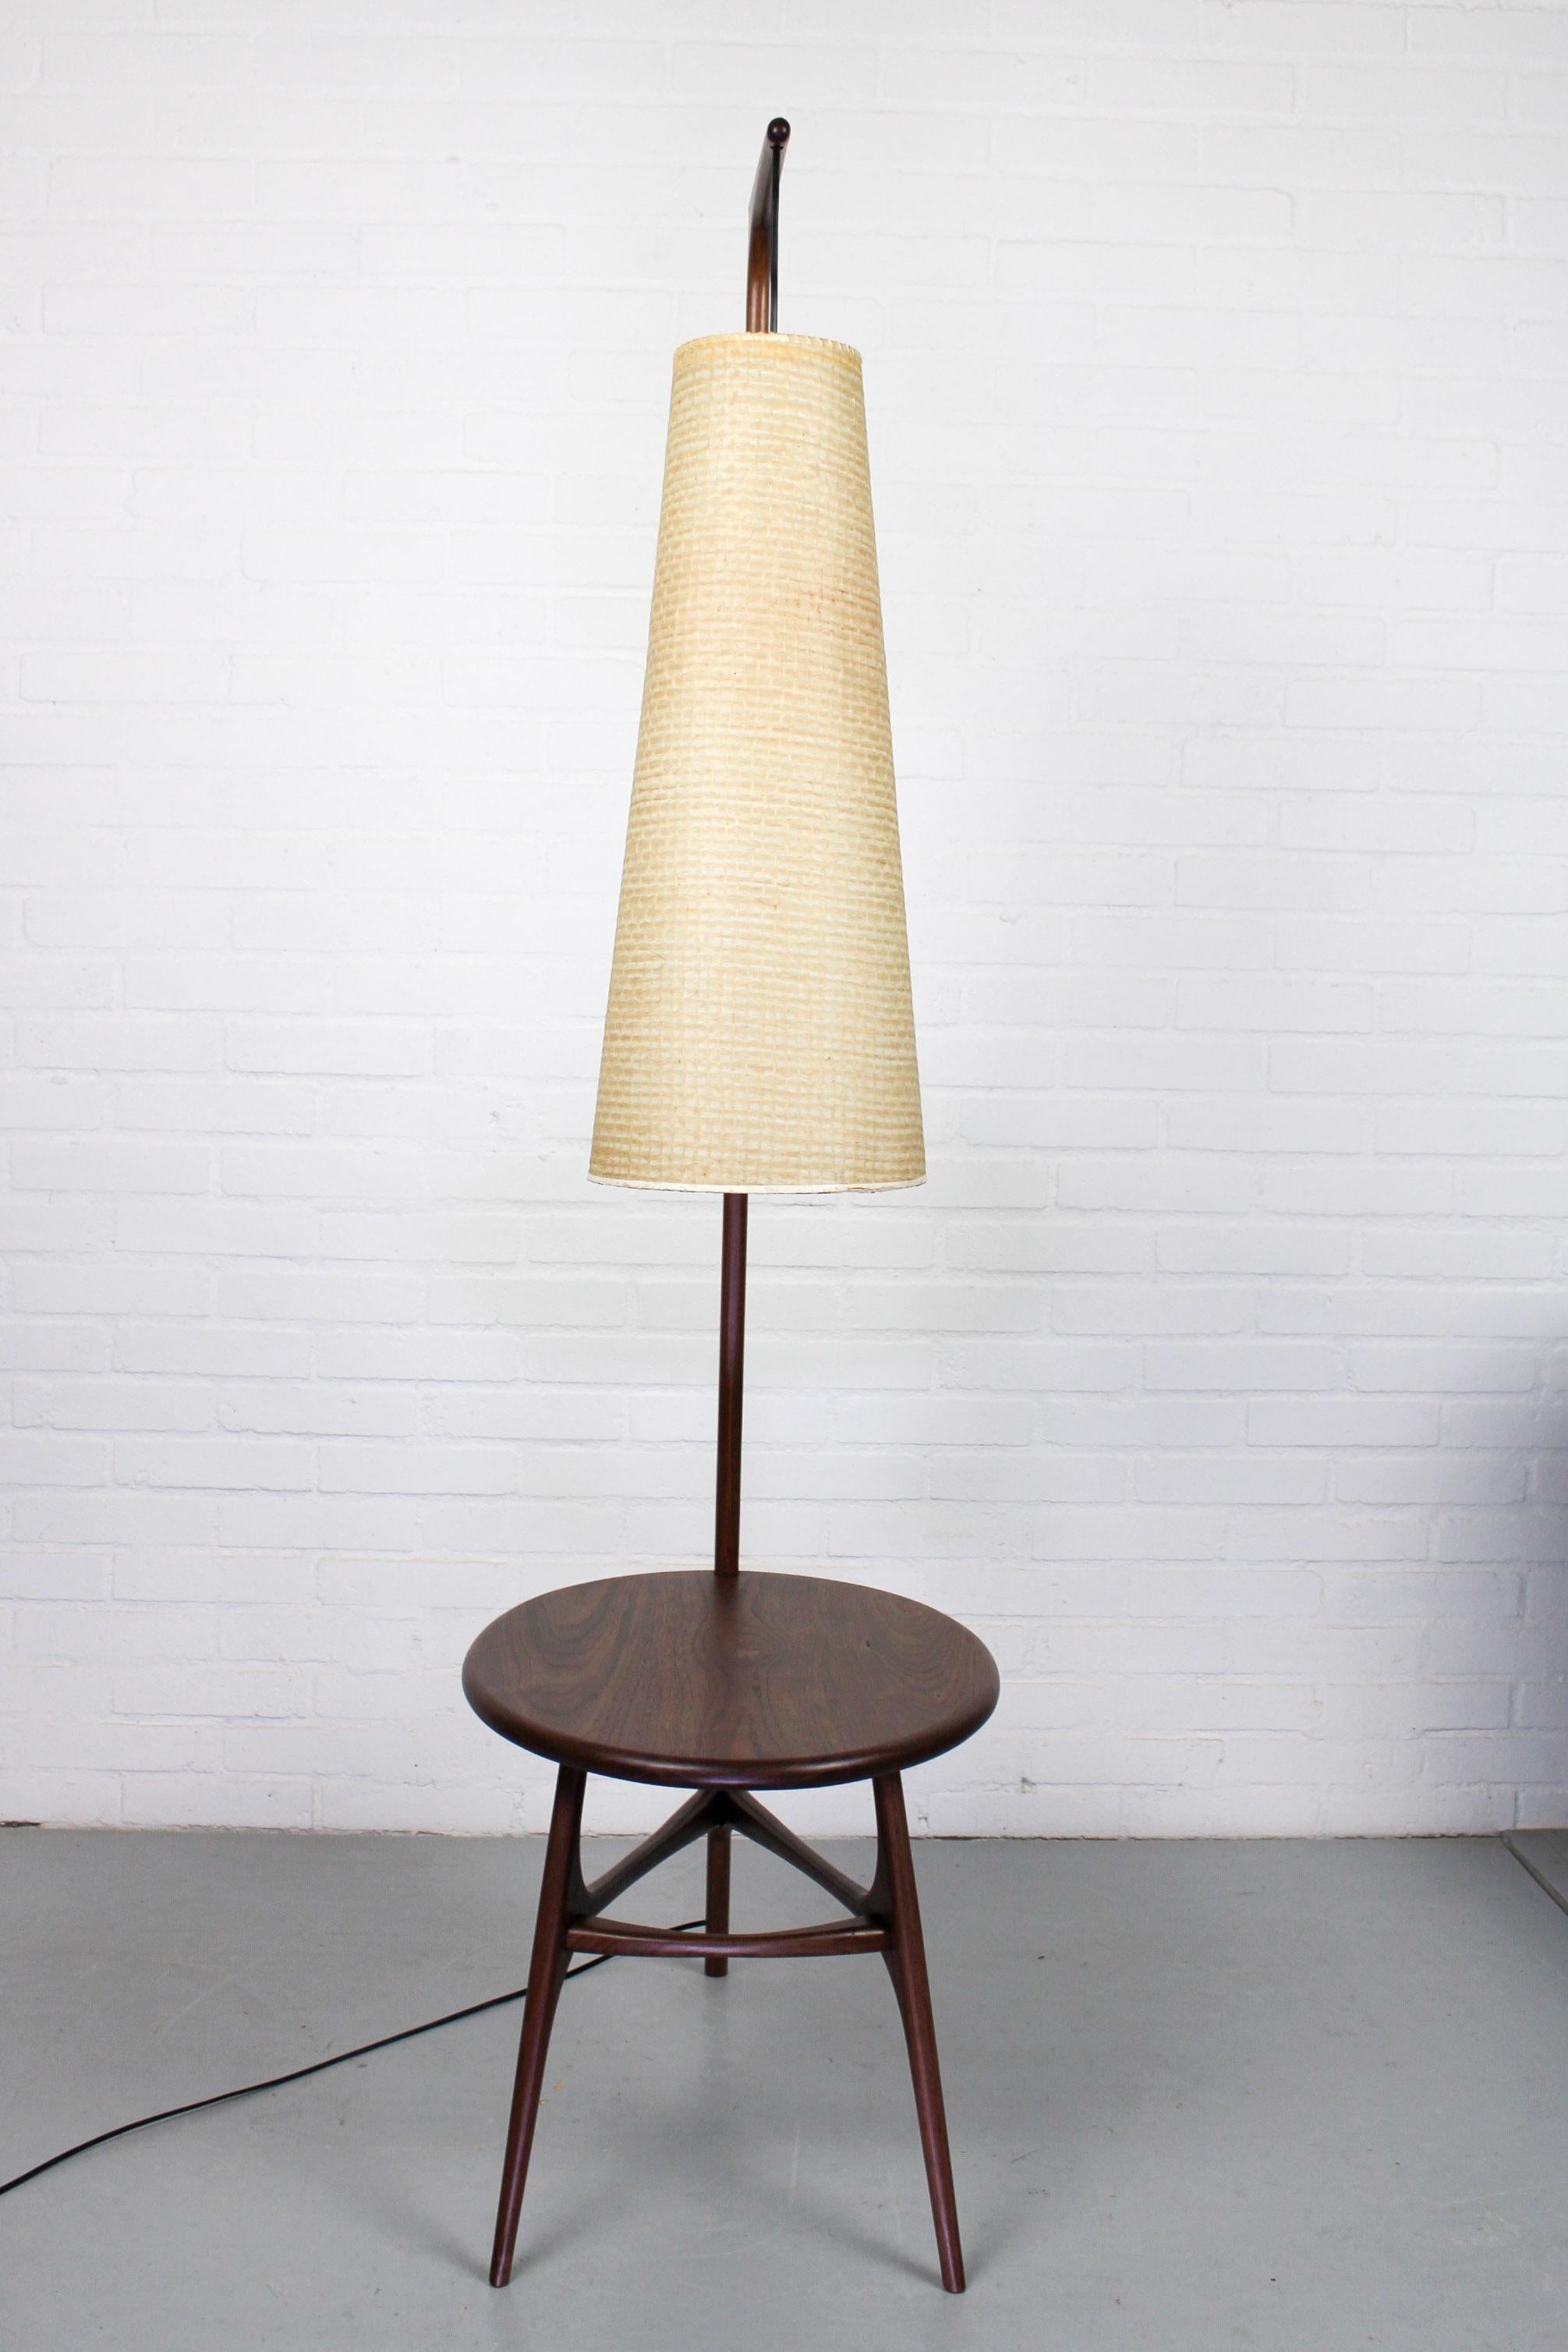 Nutwood Mid-Century Modern Lampshade 'Rispal' with Organic American Nut Table